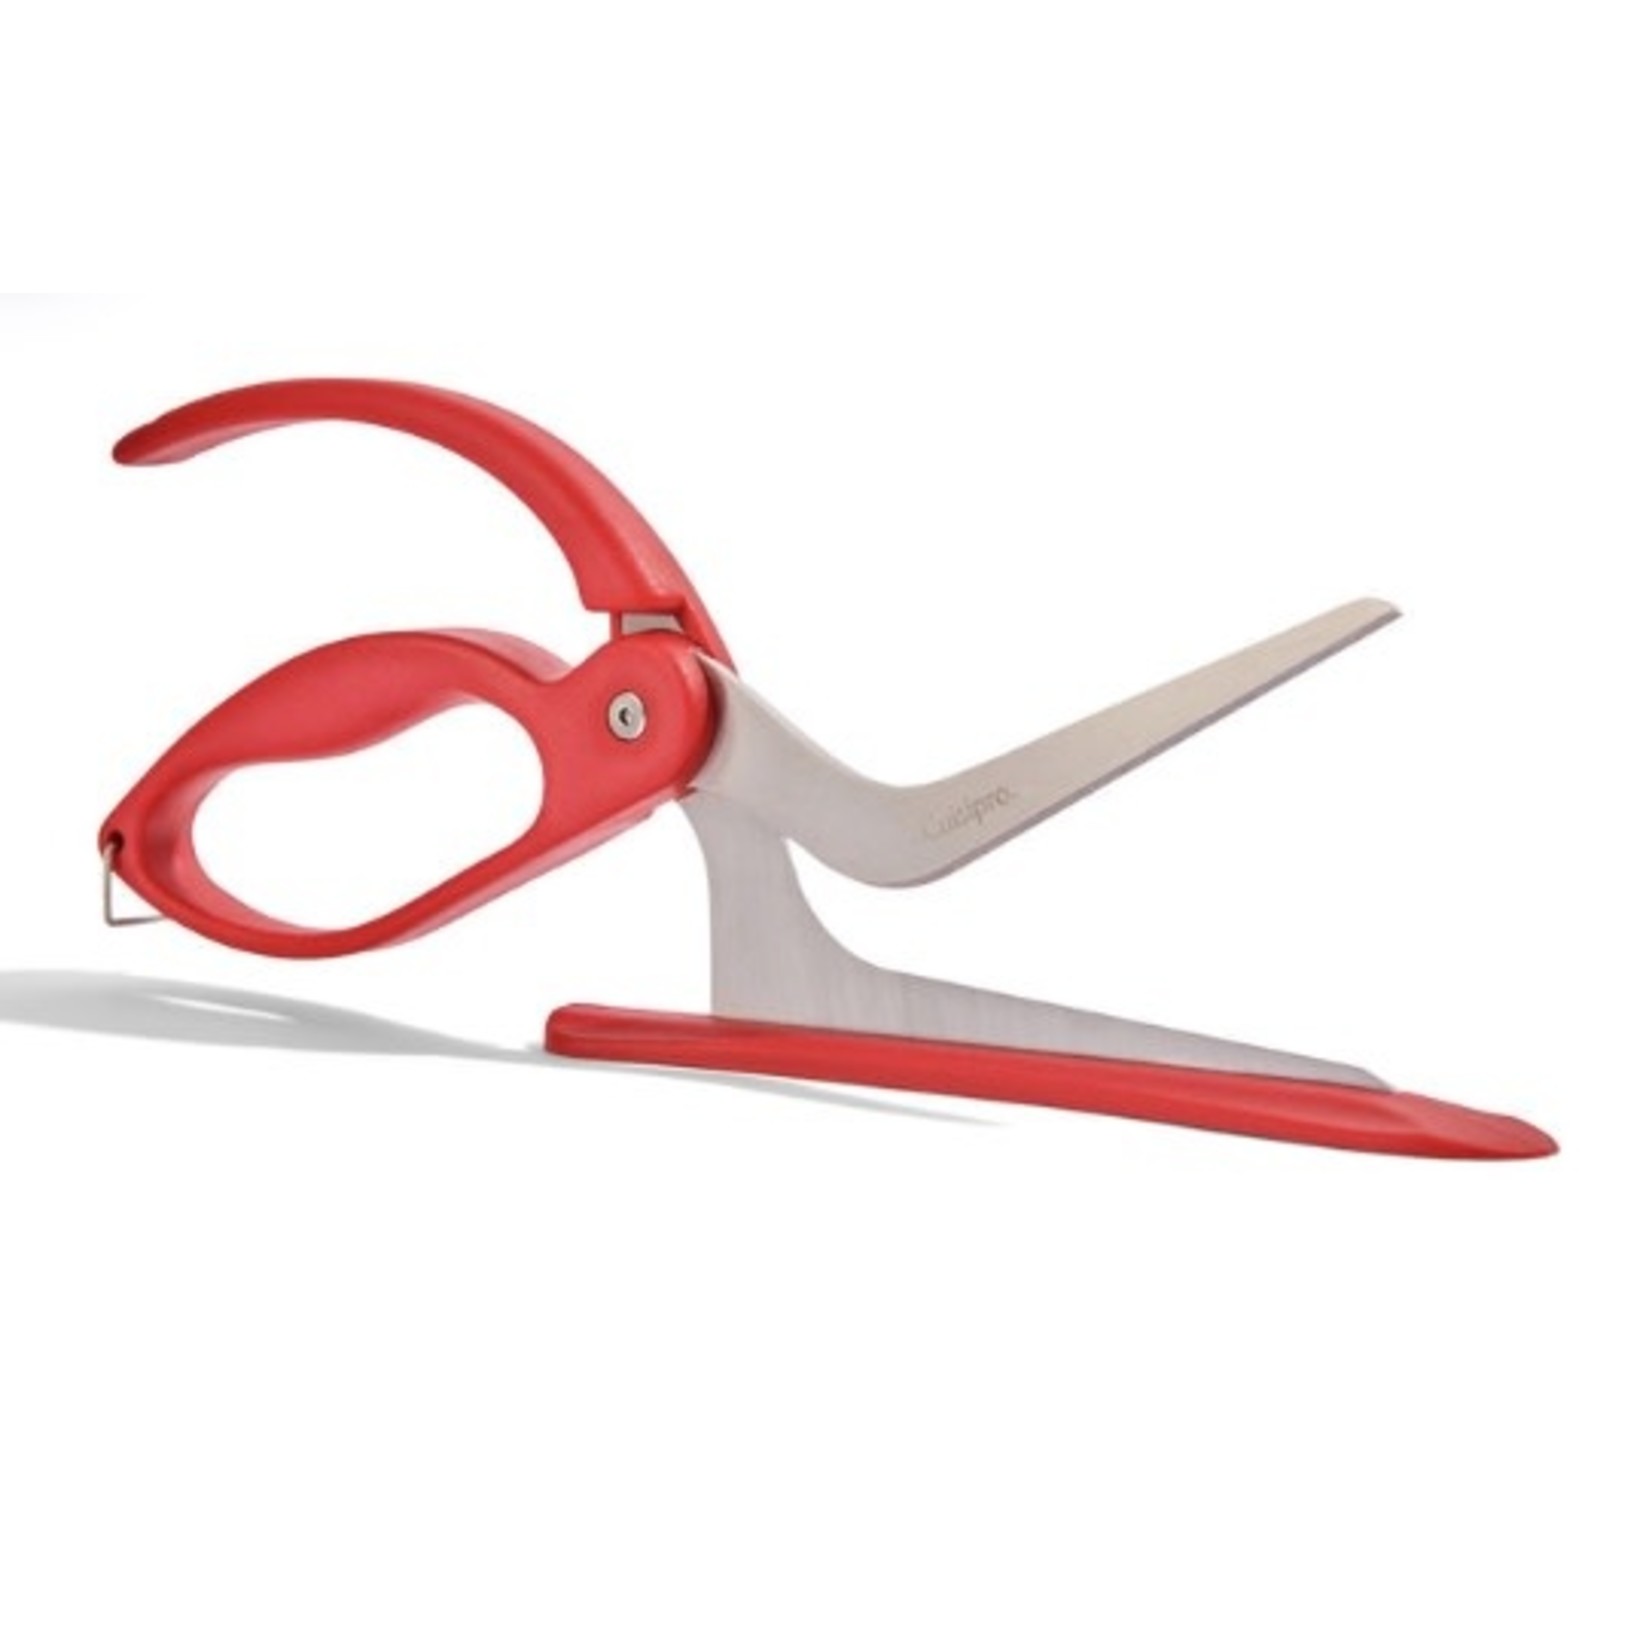 CUISIPRO CUISIPRO Pizza Shears -Red